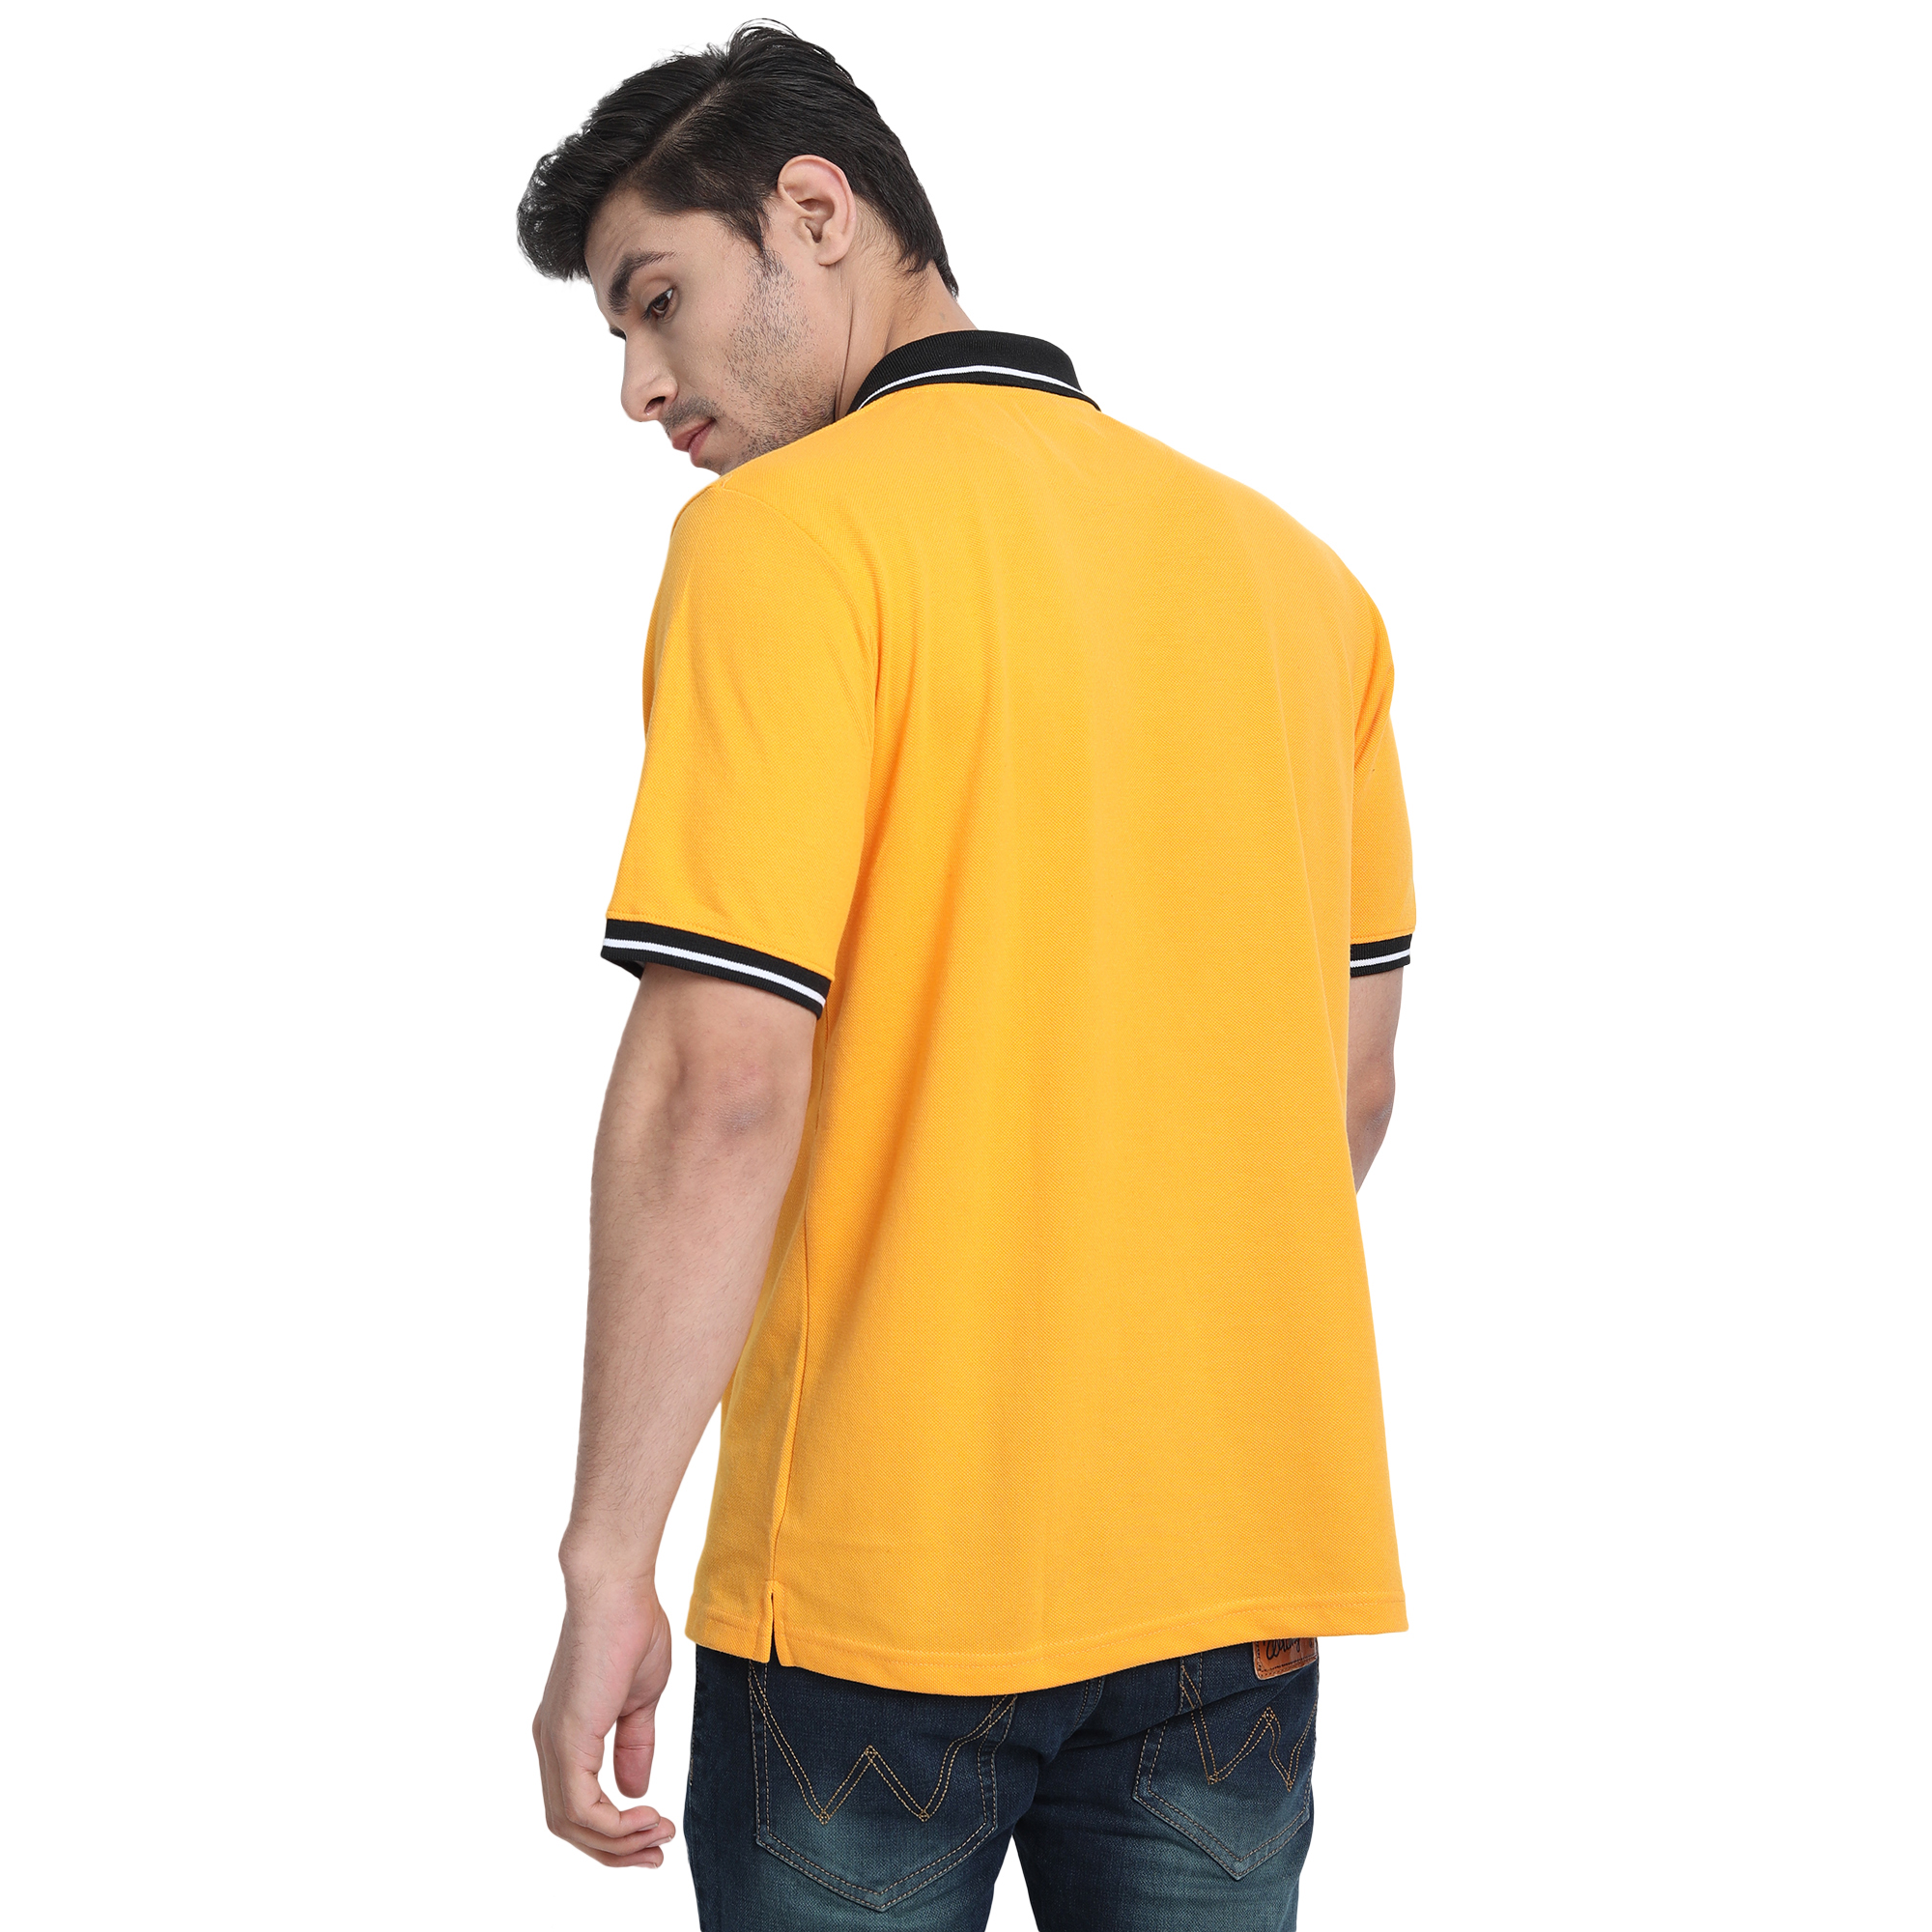 JCB Yellow Polo T-Shirt – Welcome to the JCB merchandise shop India website